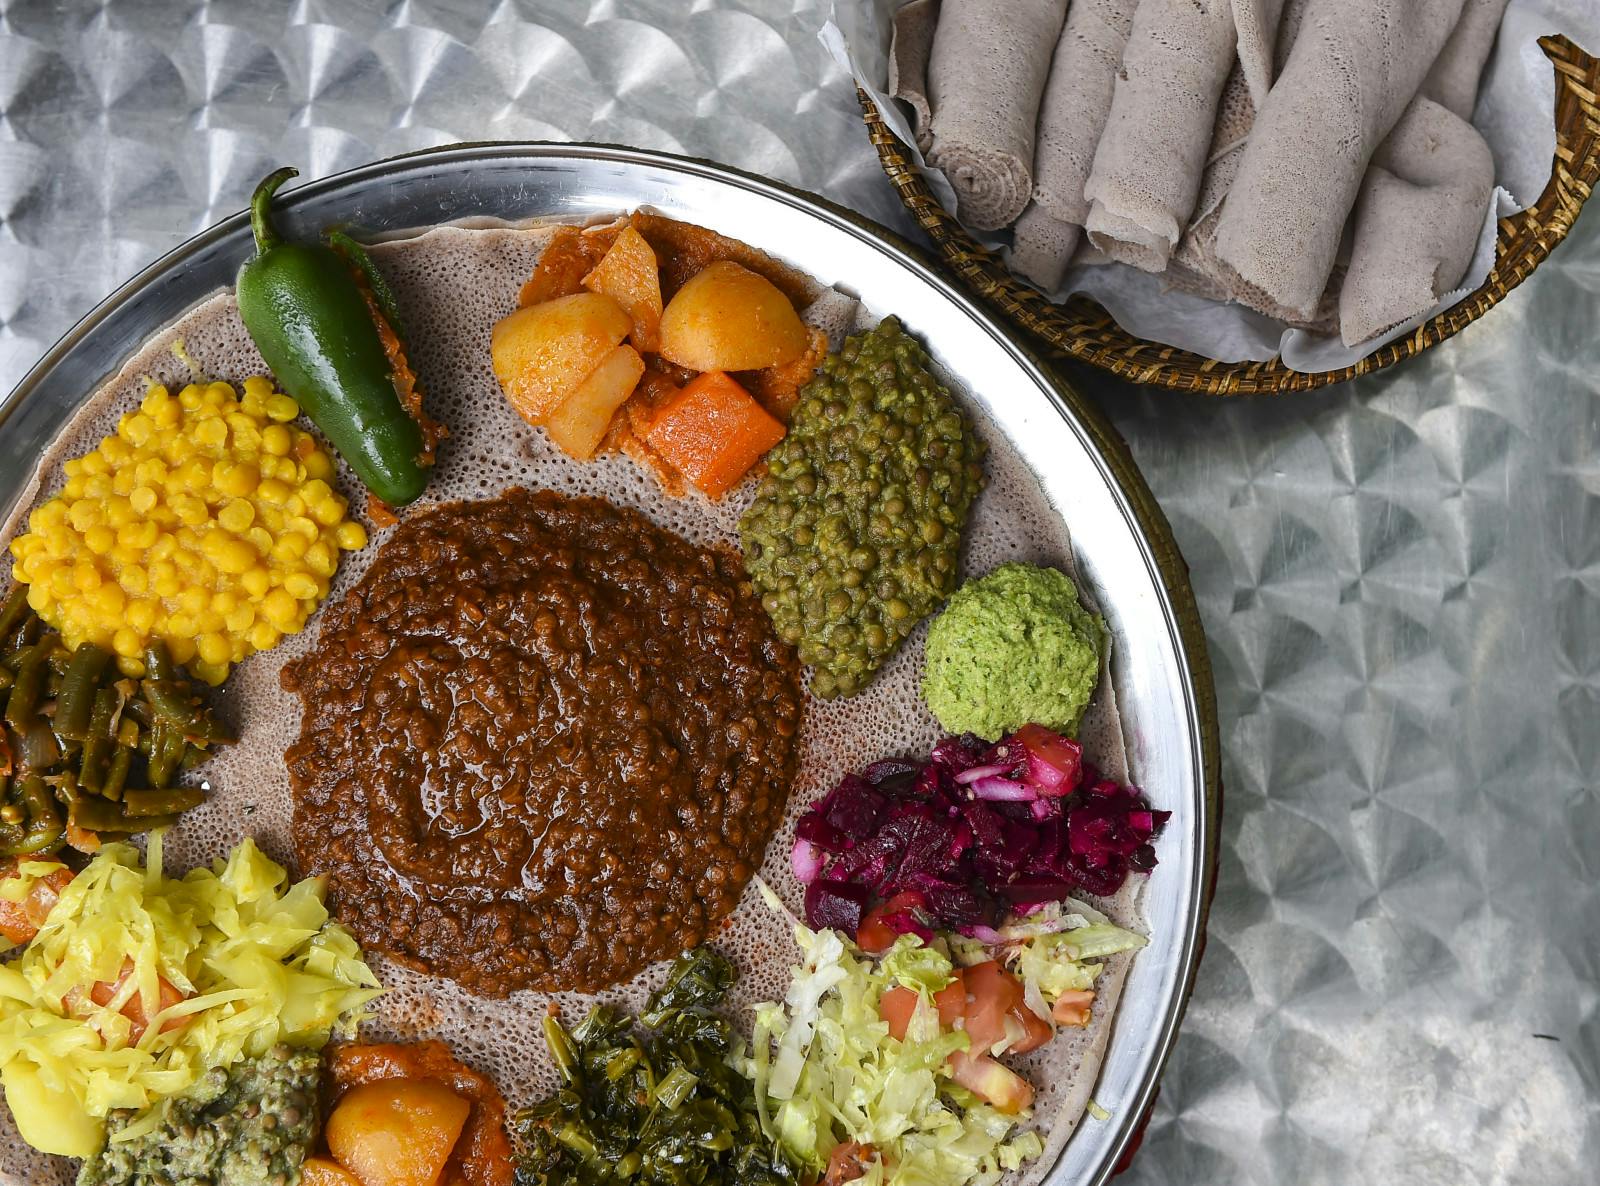 red lentils, brown lentils, jalapeños, beets, collard greens, potatoes, carrots, azifa, cabbage, green beans, split peas served with injera at Bete Ethiopian Cuisine and Cafe, Silver Spring (Ricky Carioti/The Washington Post via Getty Images)